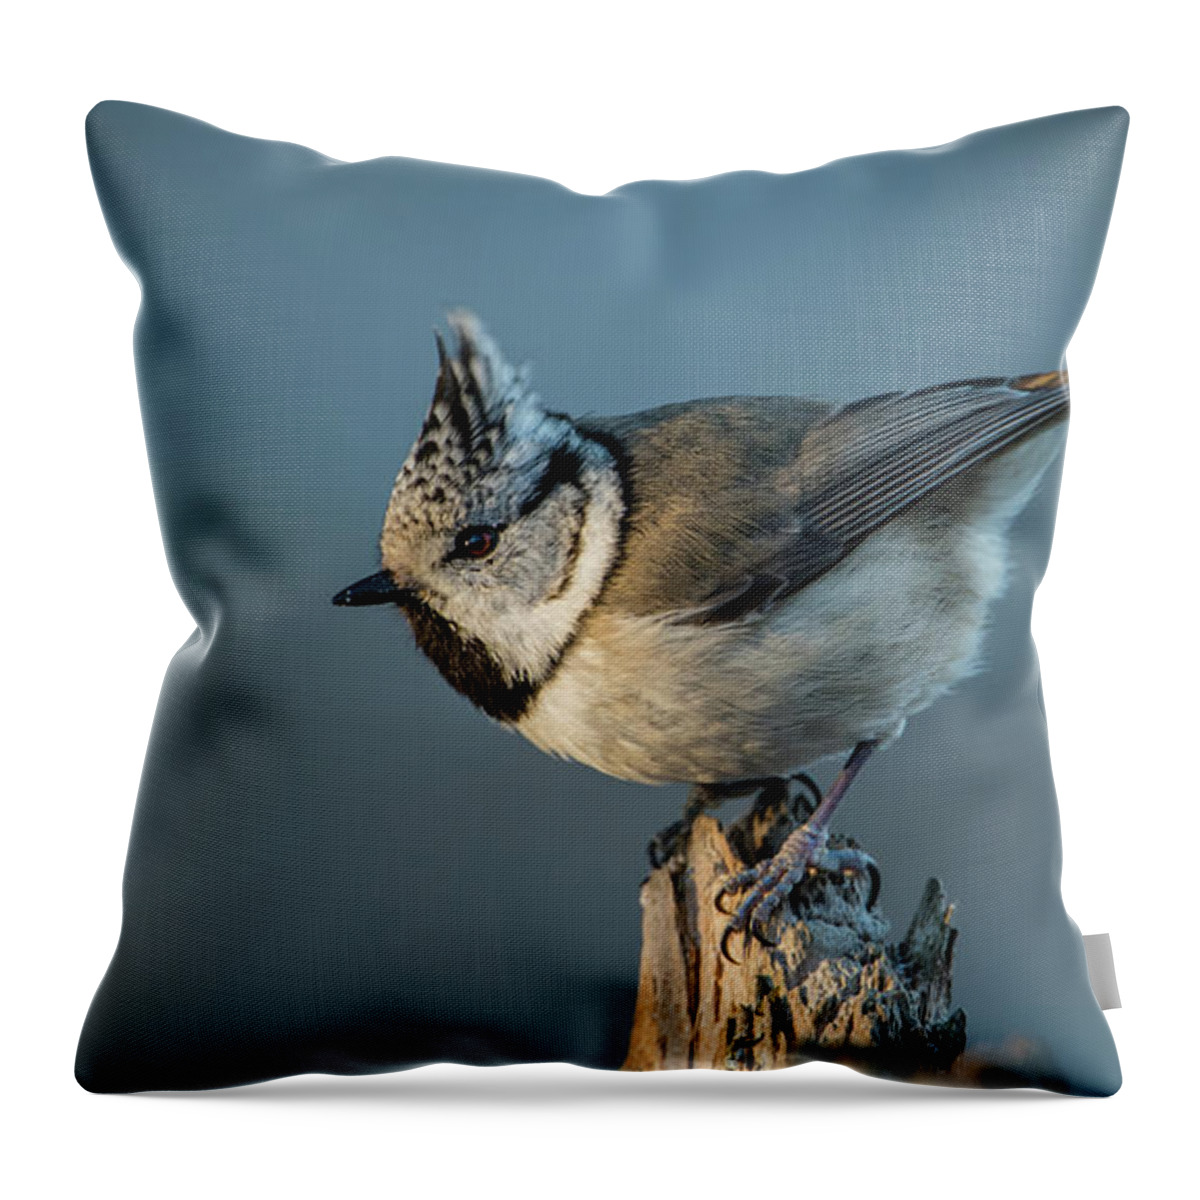 Crest Throw Pillow featuring the photograph Crest by Torbjorn Swenelius